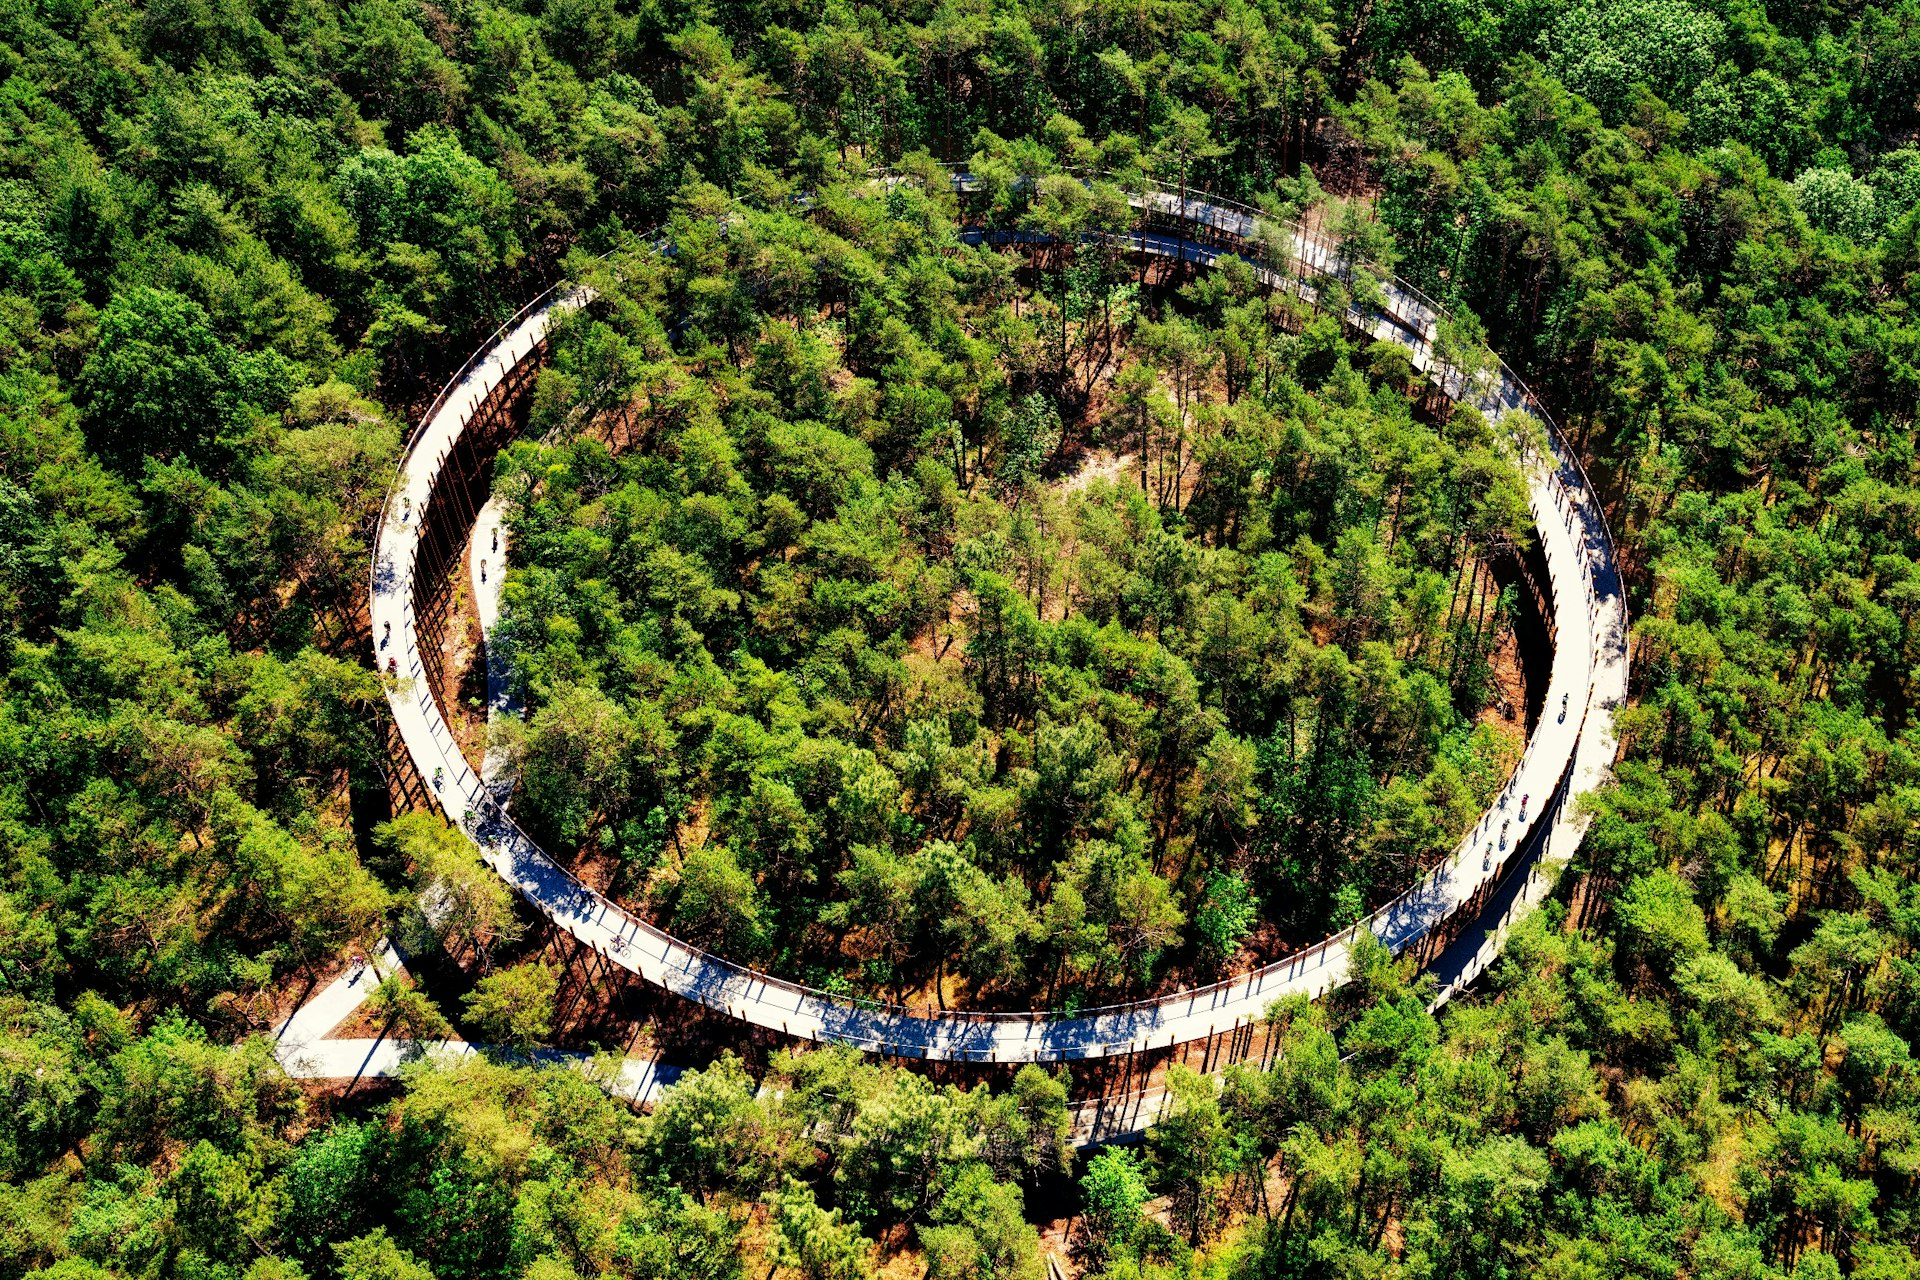 A circular cycle trail through a forest canopy in Belgium